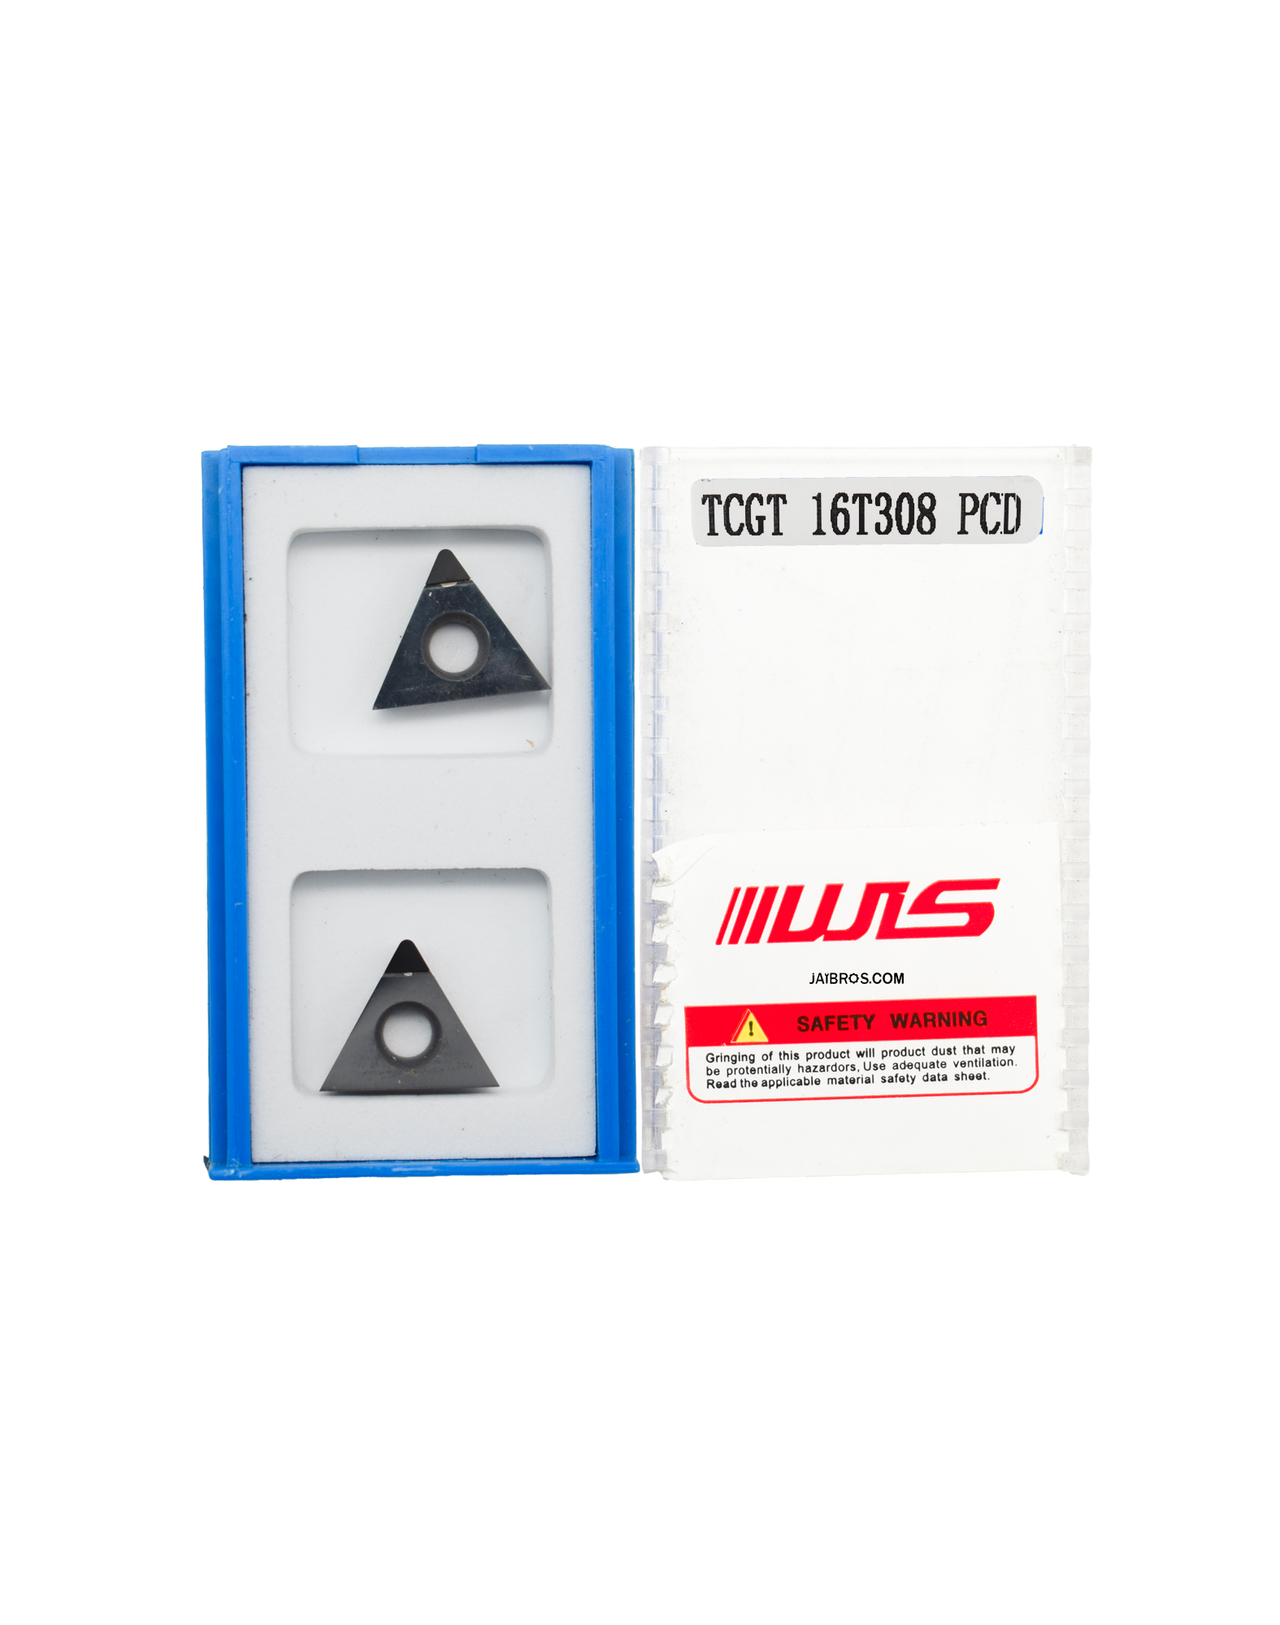 WS TCGW16T304/08 pcd insert Pack of 2